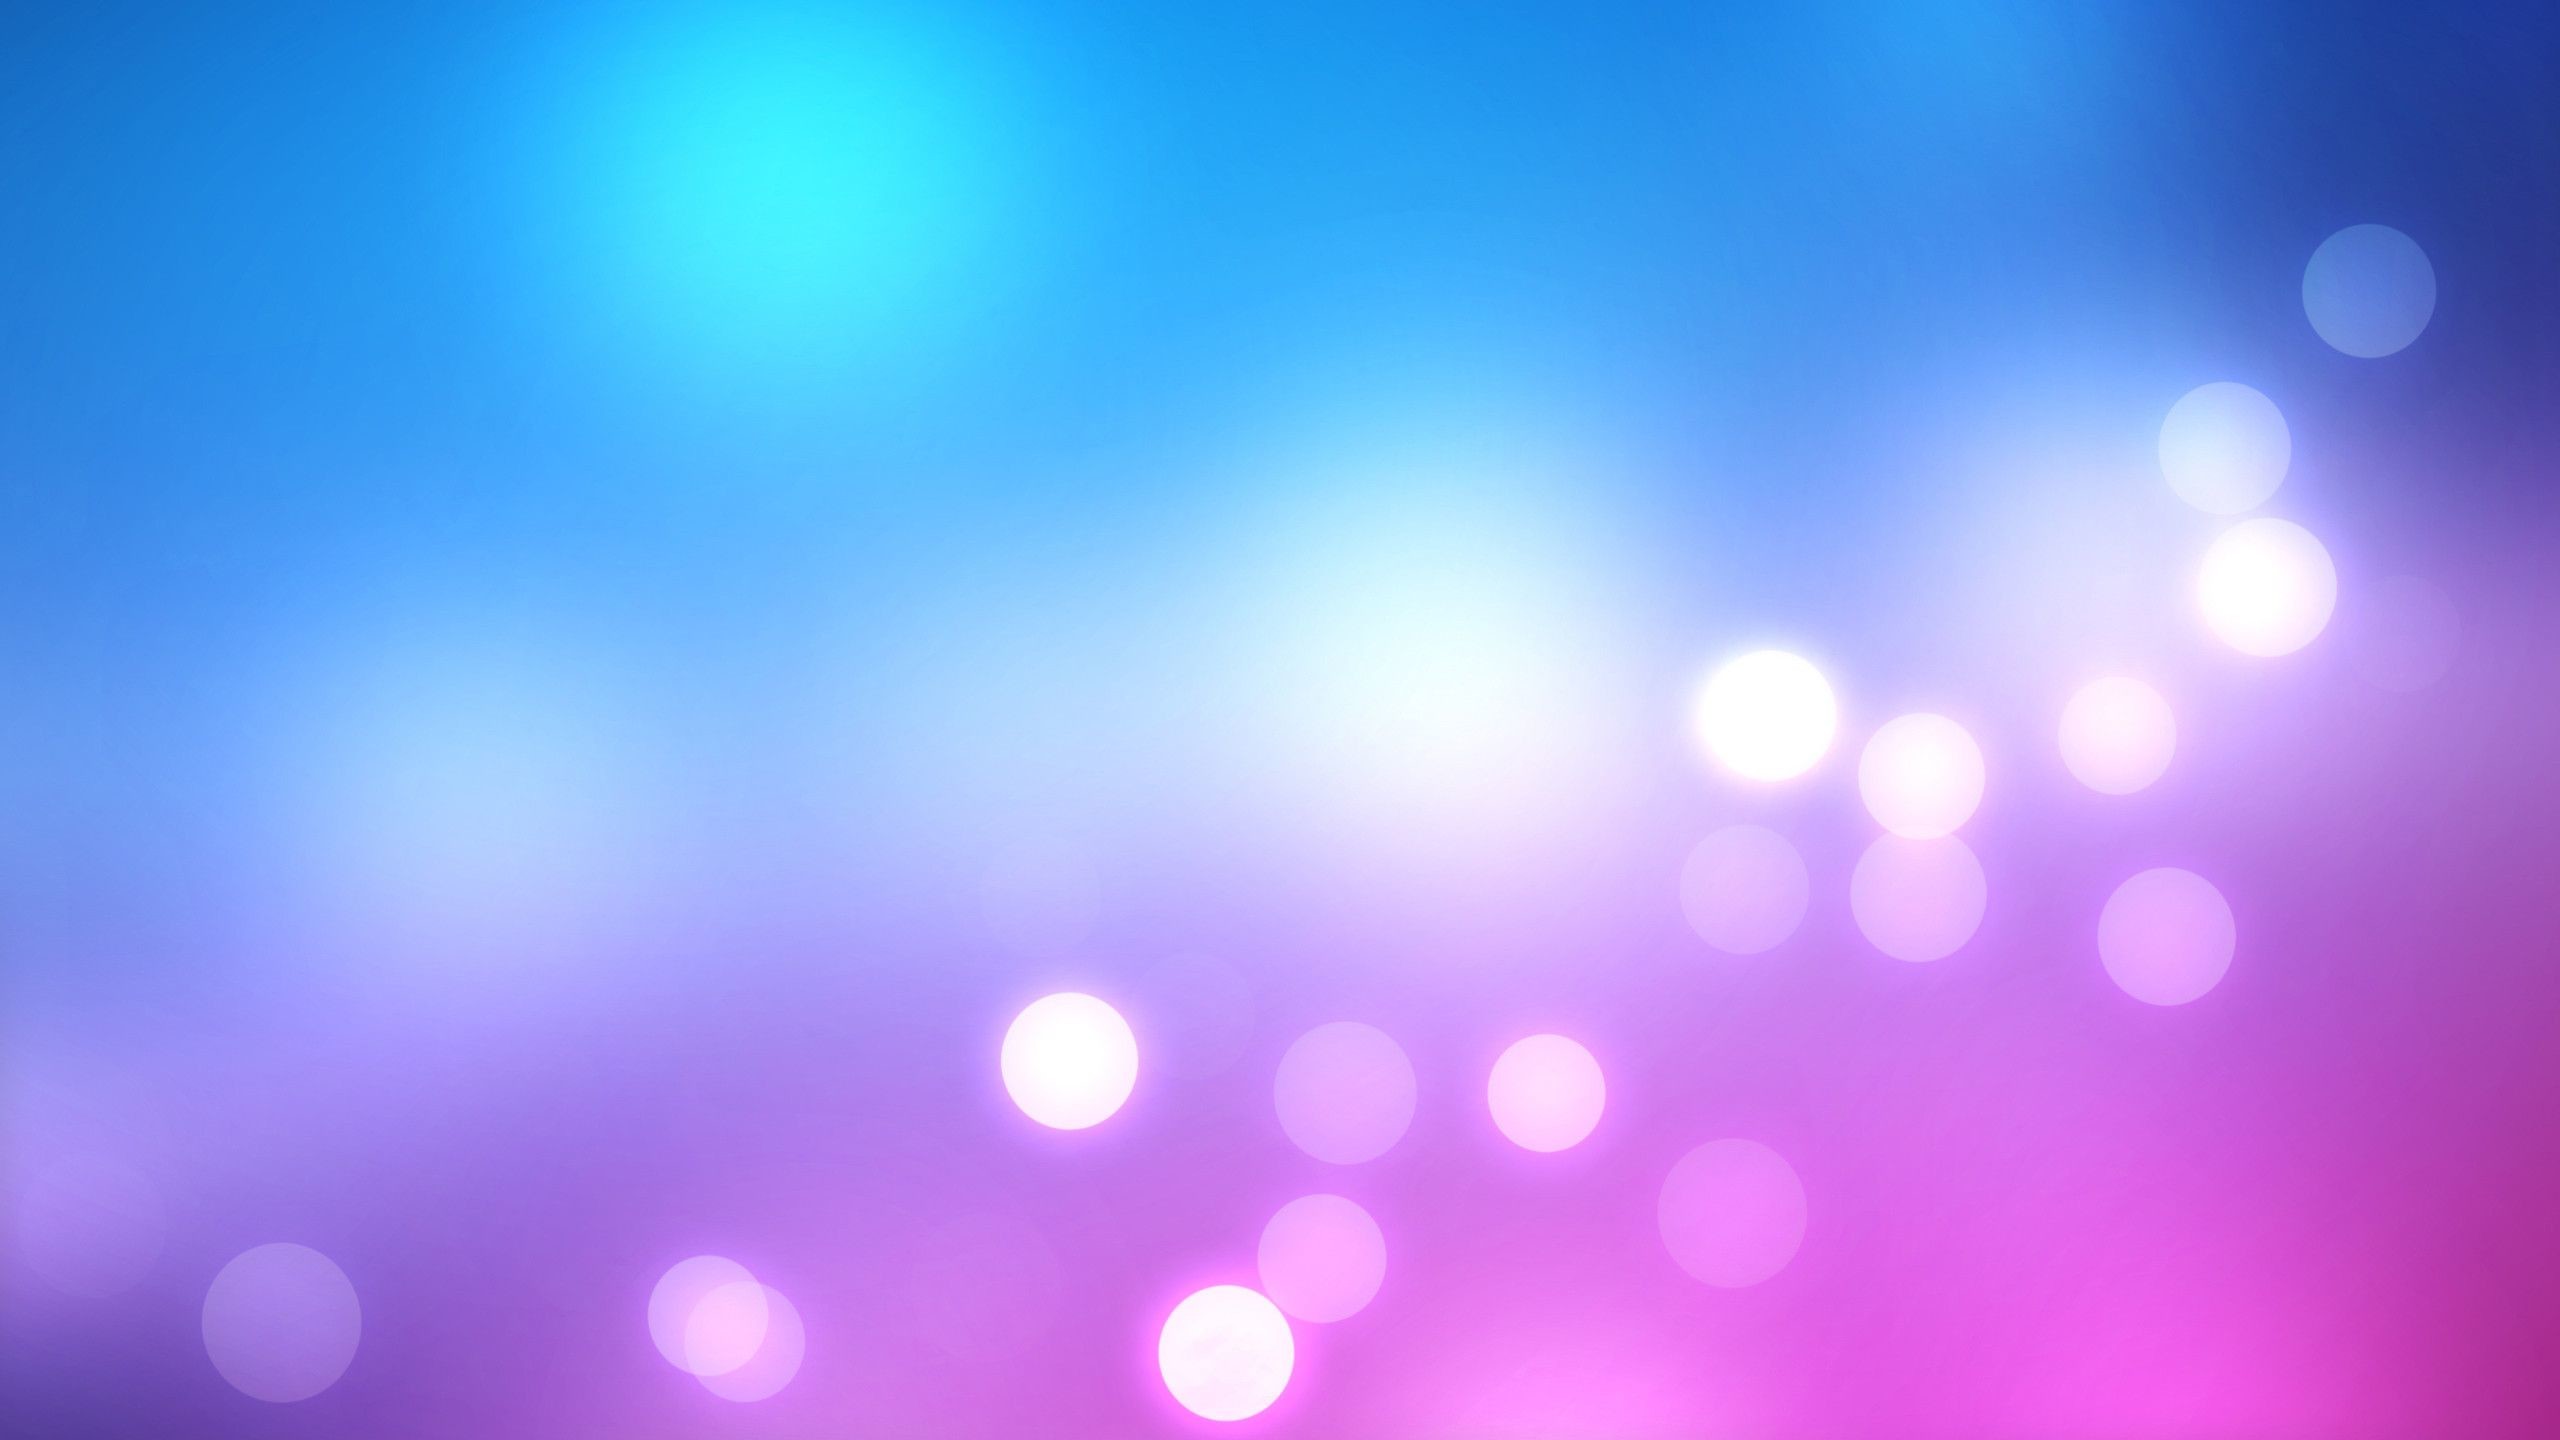 Wallpapers For Light Blue And Purple Backgrounds